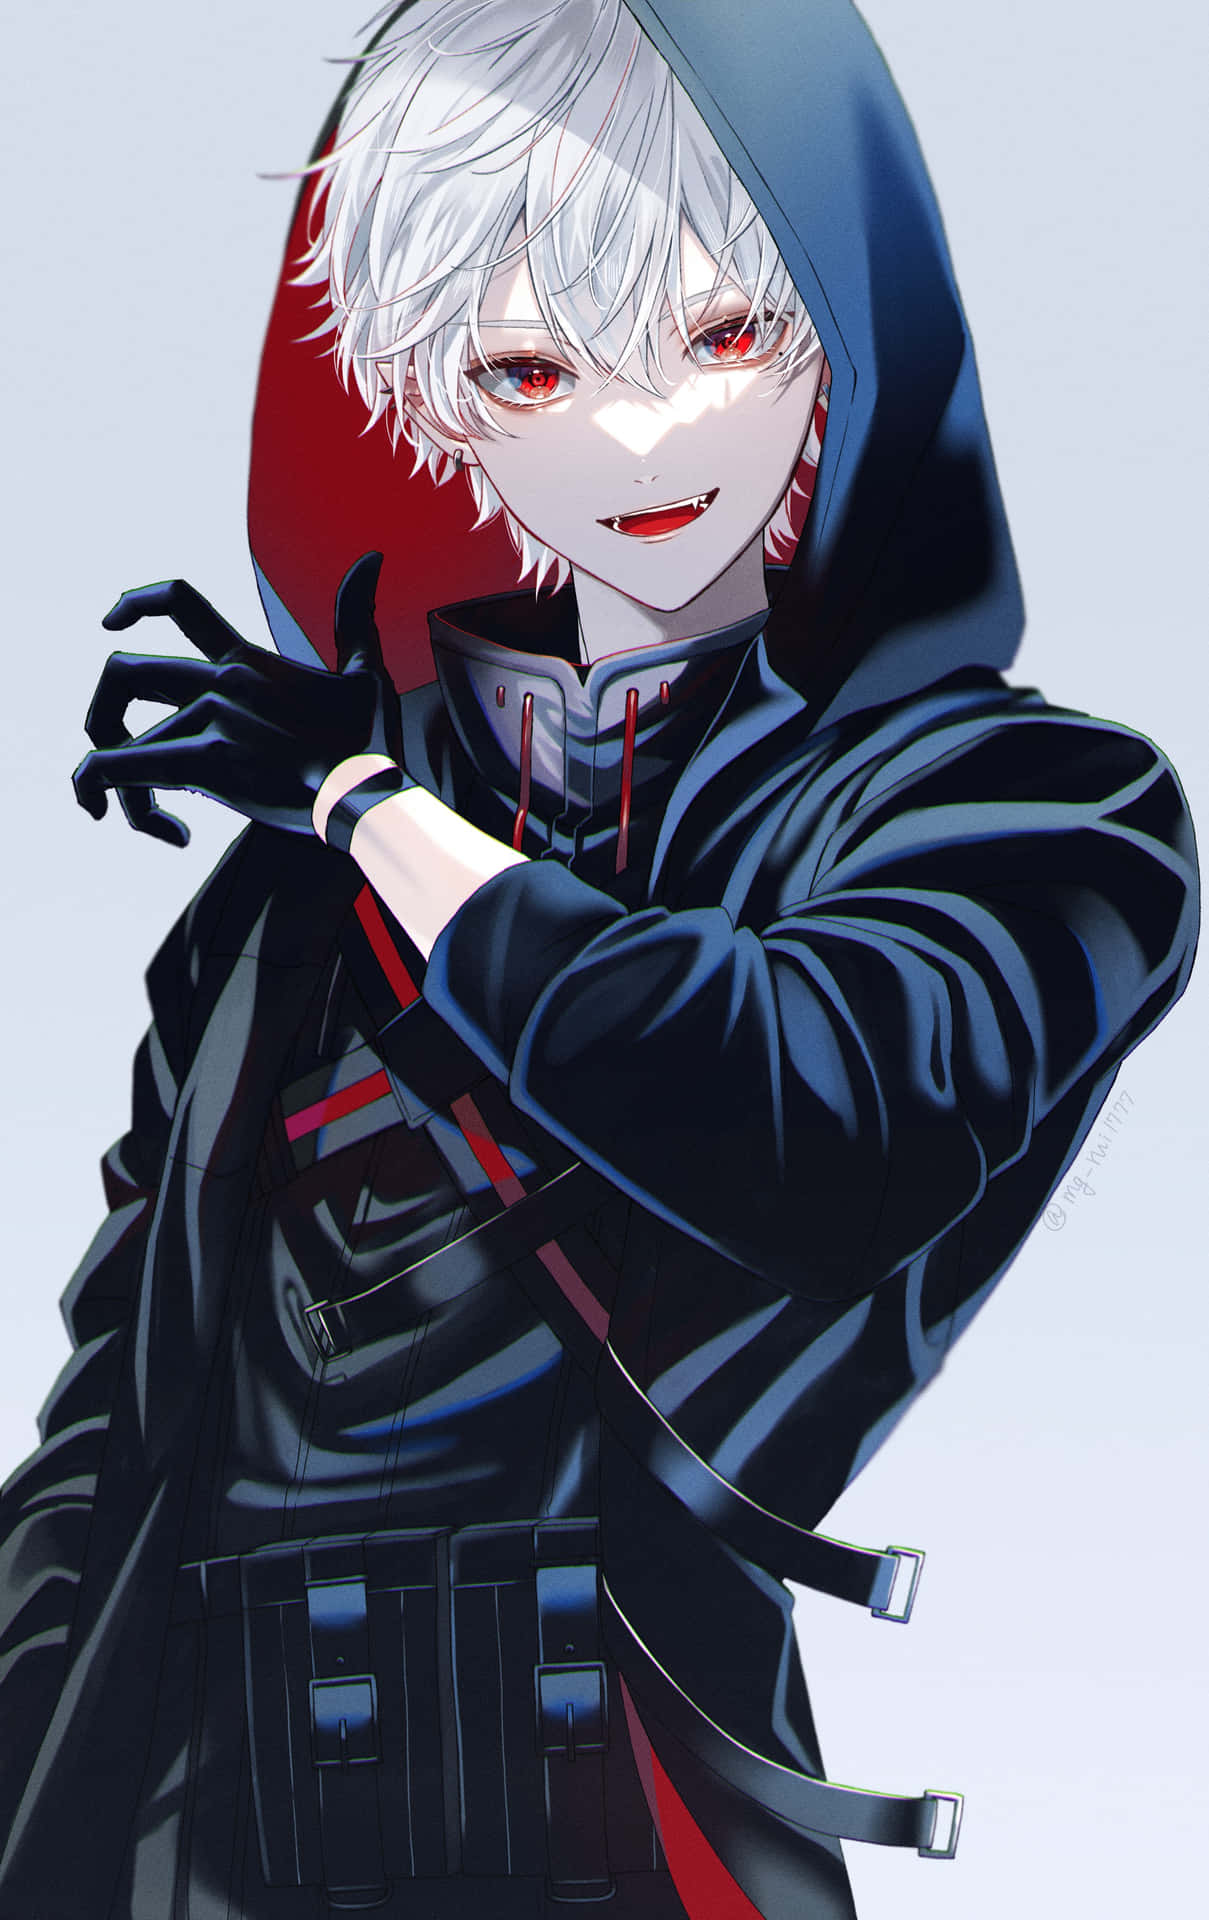 Mysterious_ Red Eyed_ Anime_ Boy Wallpaper